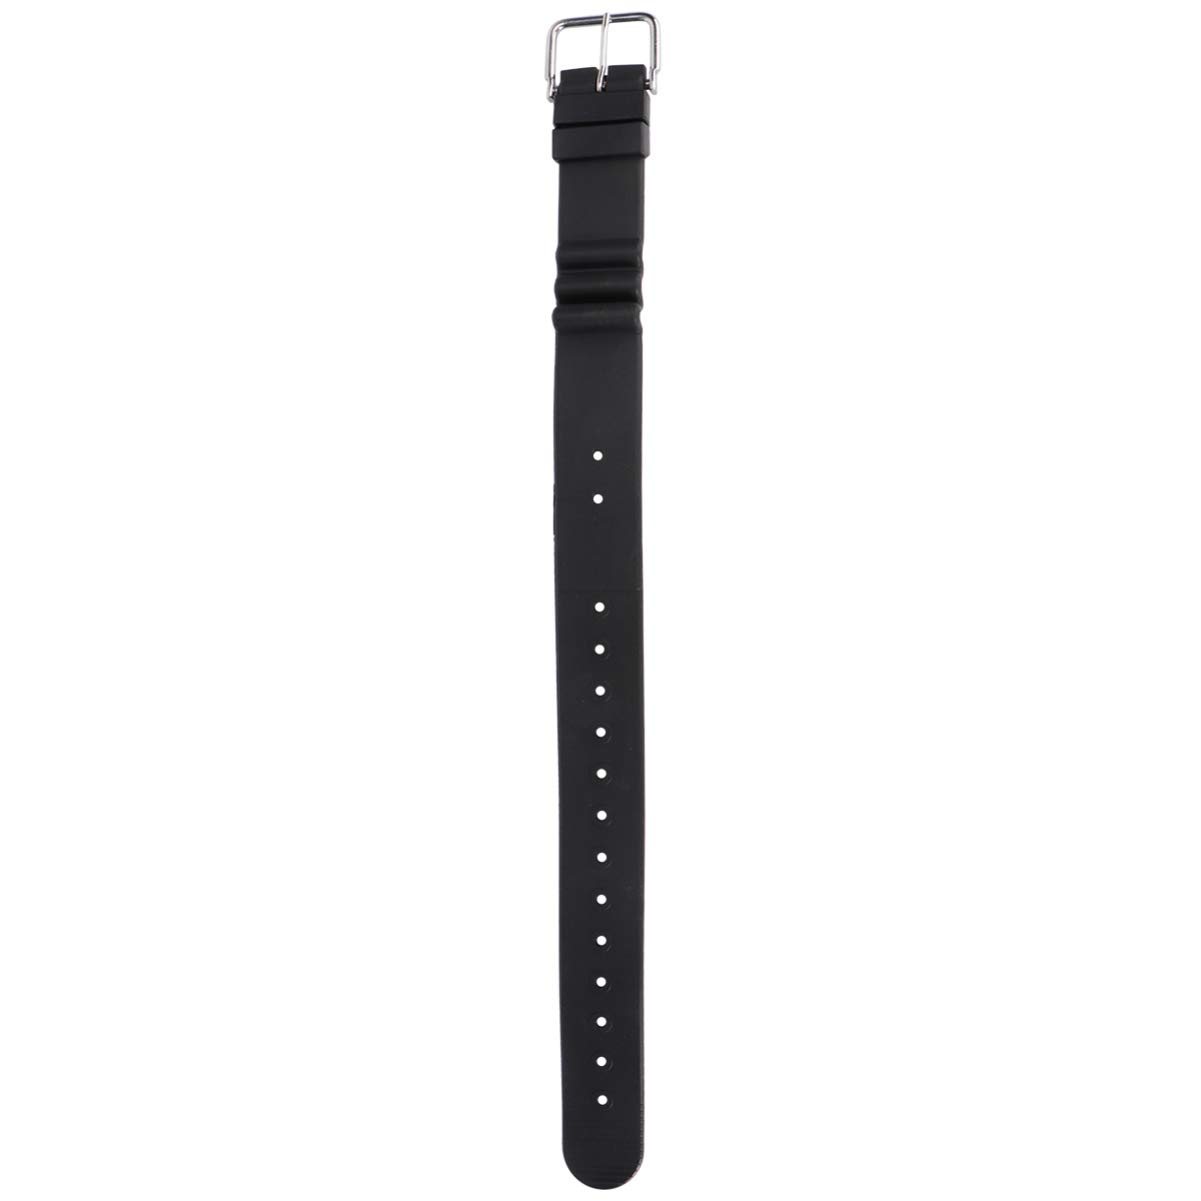 TOYANDONA Replacement Strap Wrist Compas Strap Leather Watch Band Watch Strap